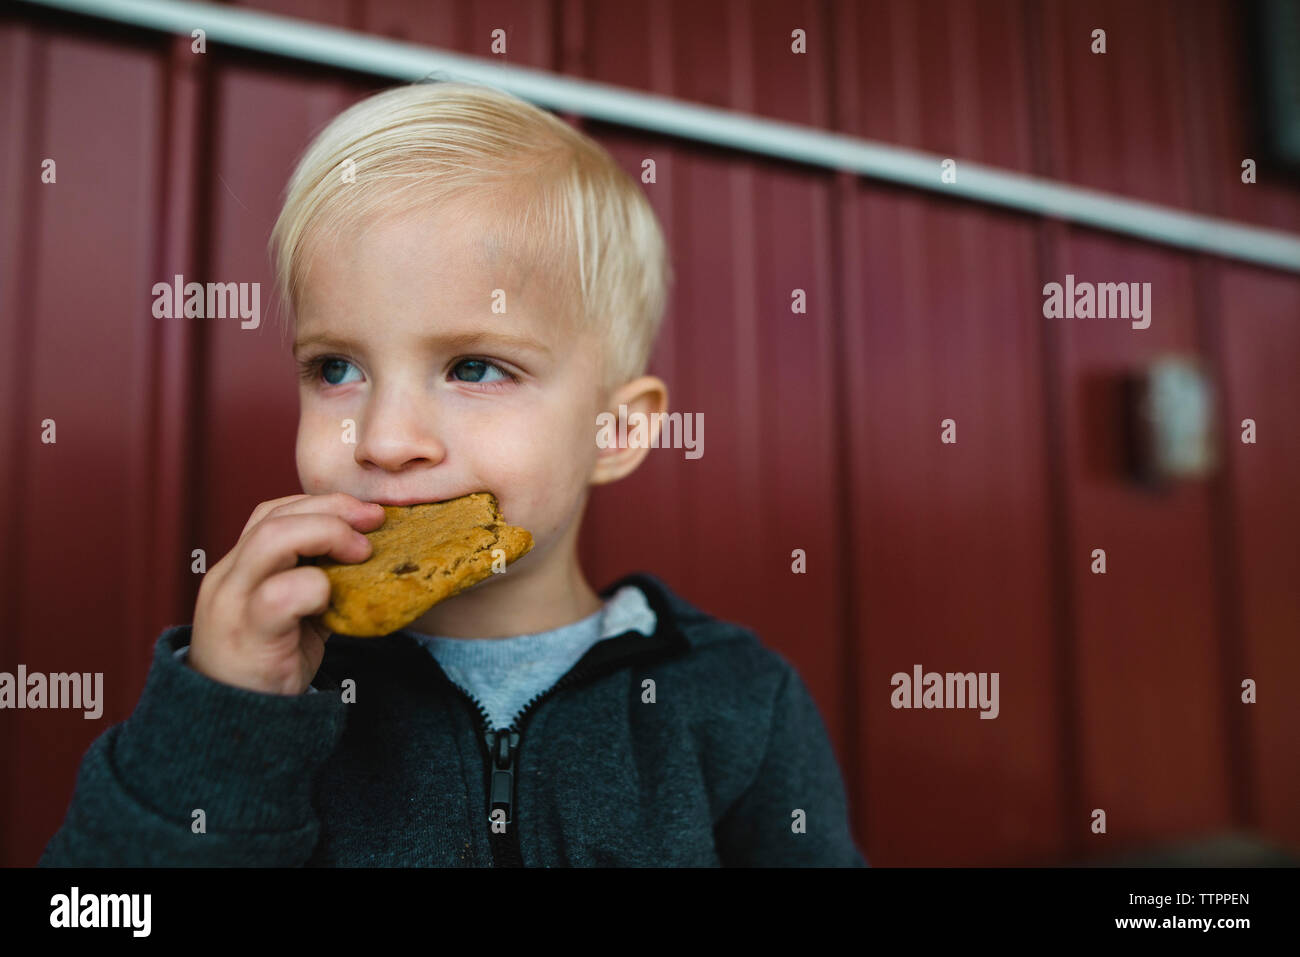 Close-up of boy eating food Stock Photo